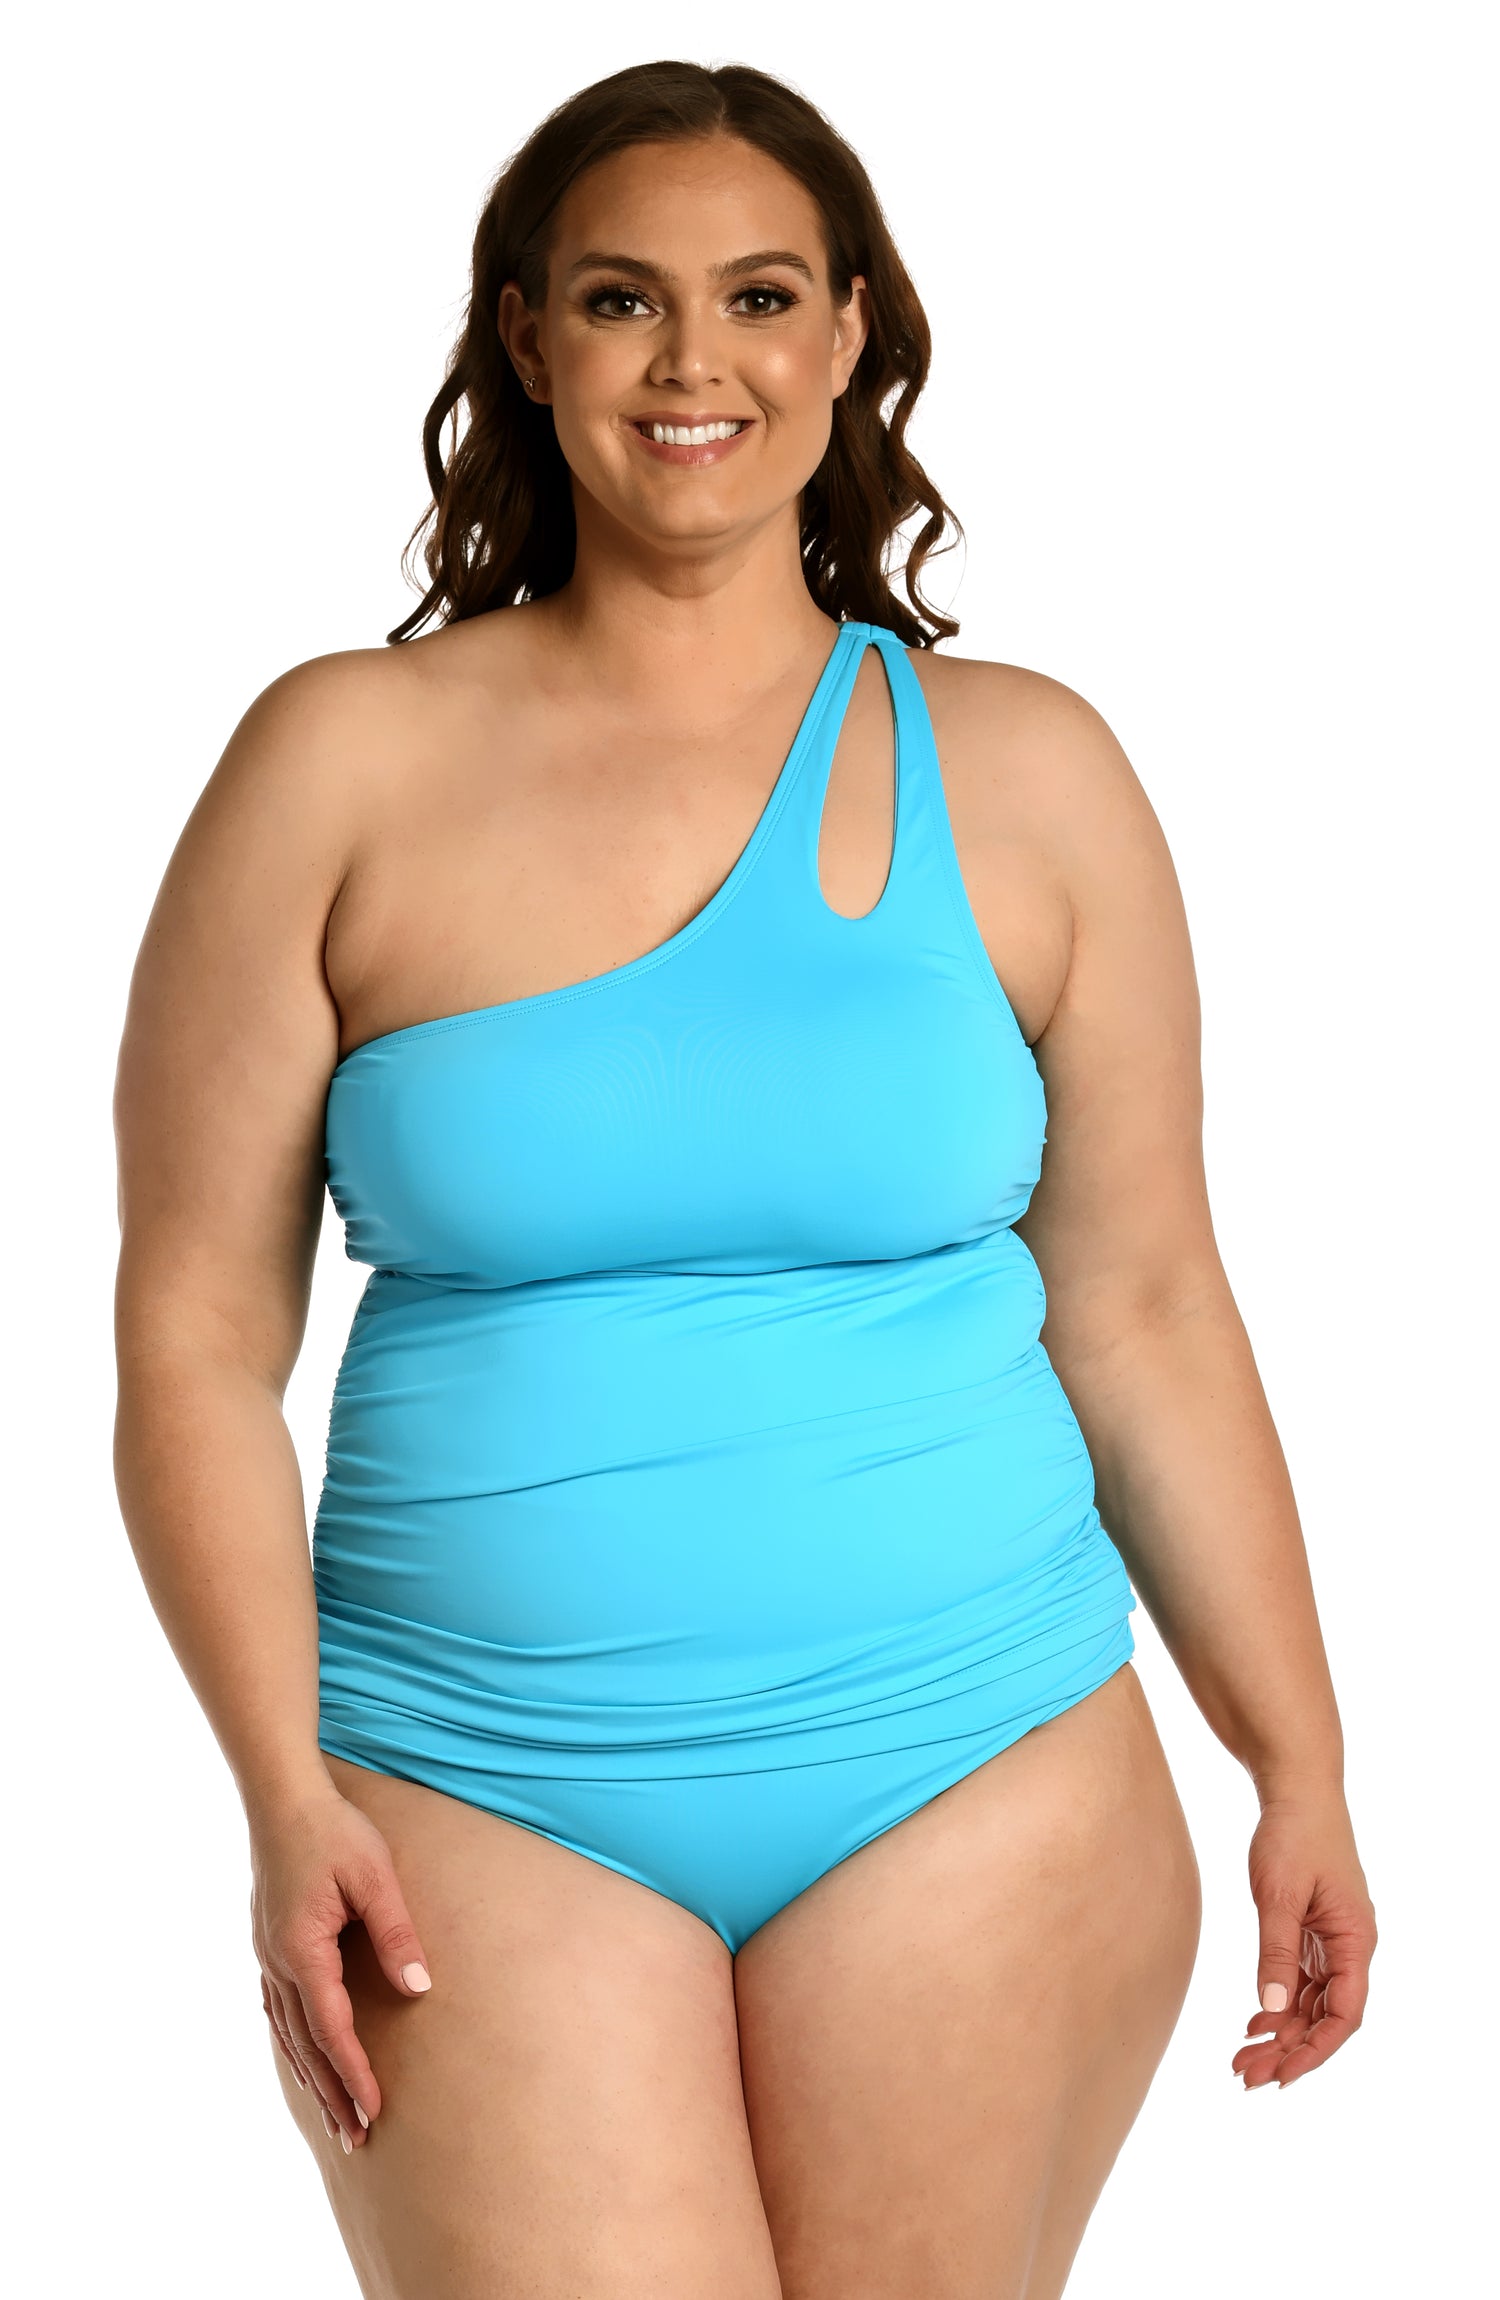 Model is wearing a azul (light blue) colored keyhole tankini swimsuit top from our Best-Selling Island Goddess collection.